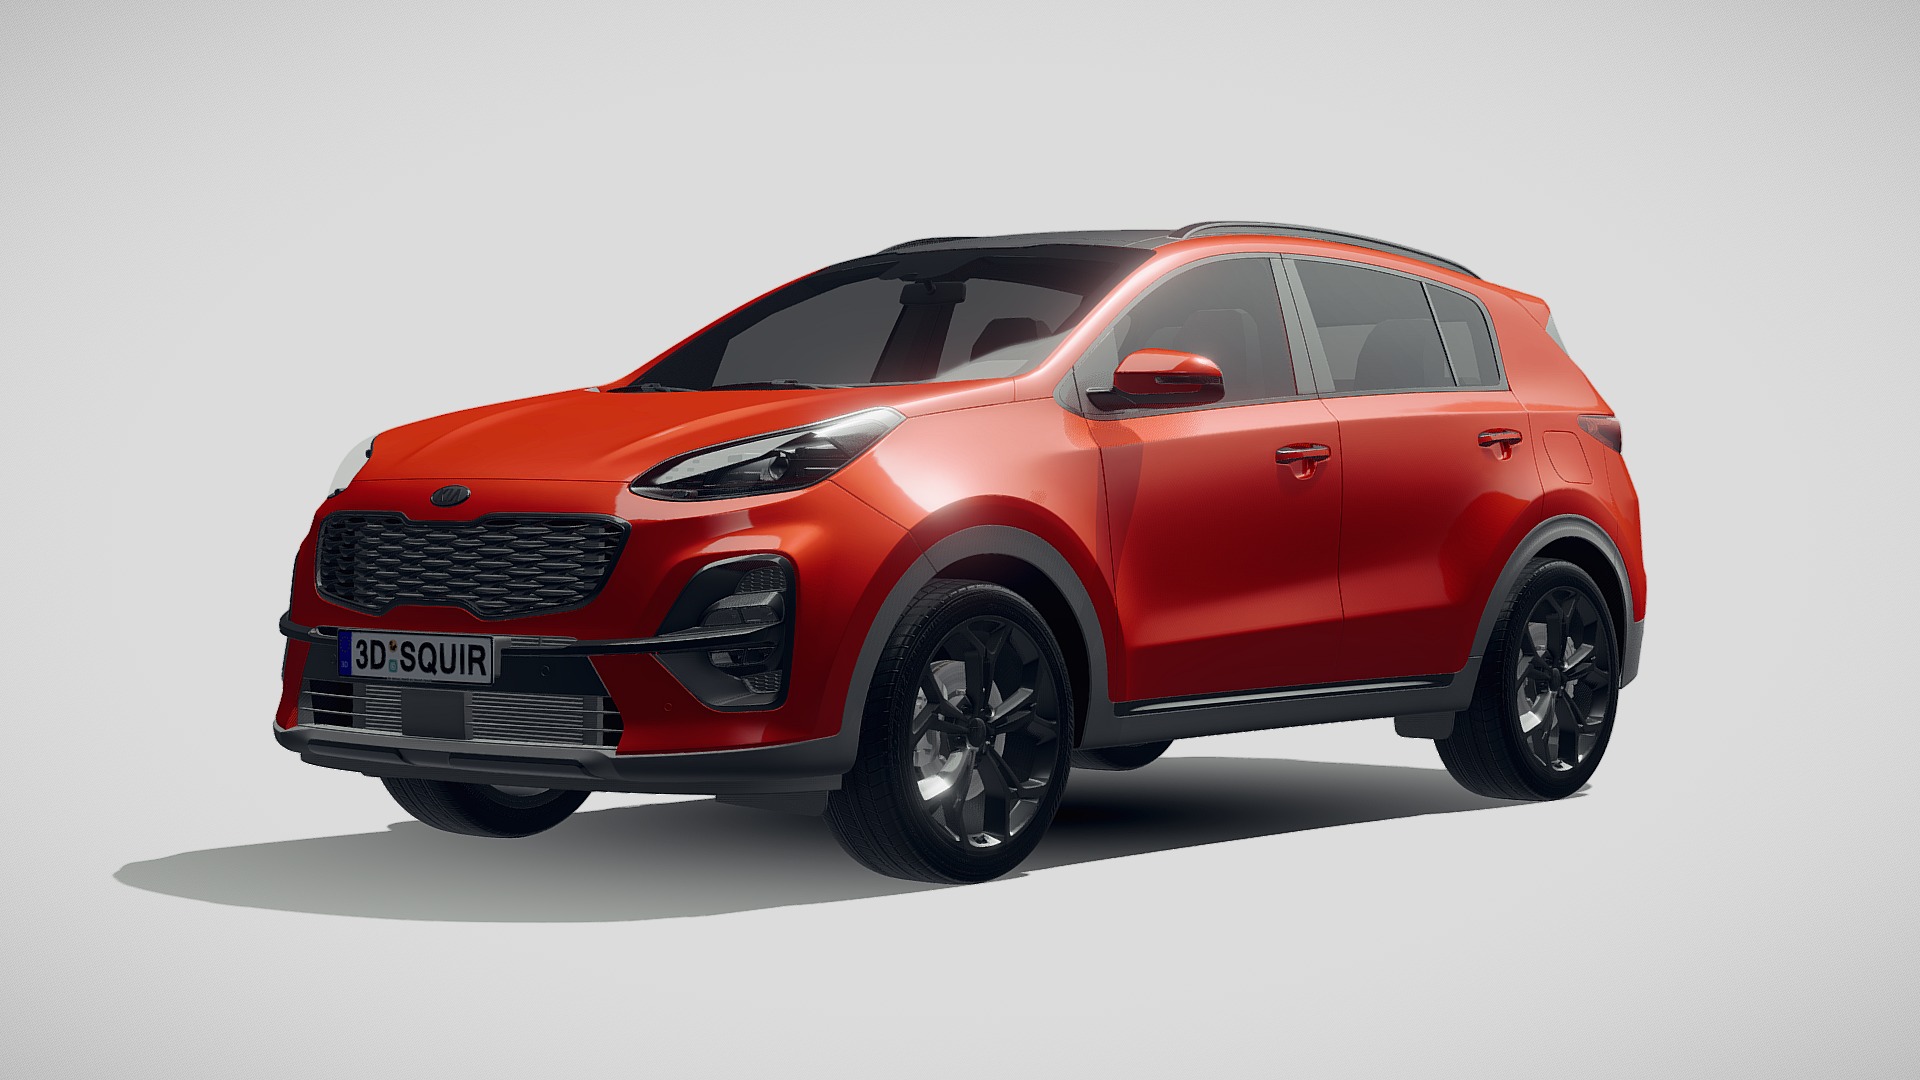 3D model Kia Sportage 2019 - This is a 3D model of the Kia Sportage 2019. The 3D model is about a red car with a white background.